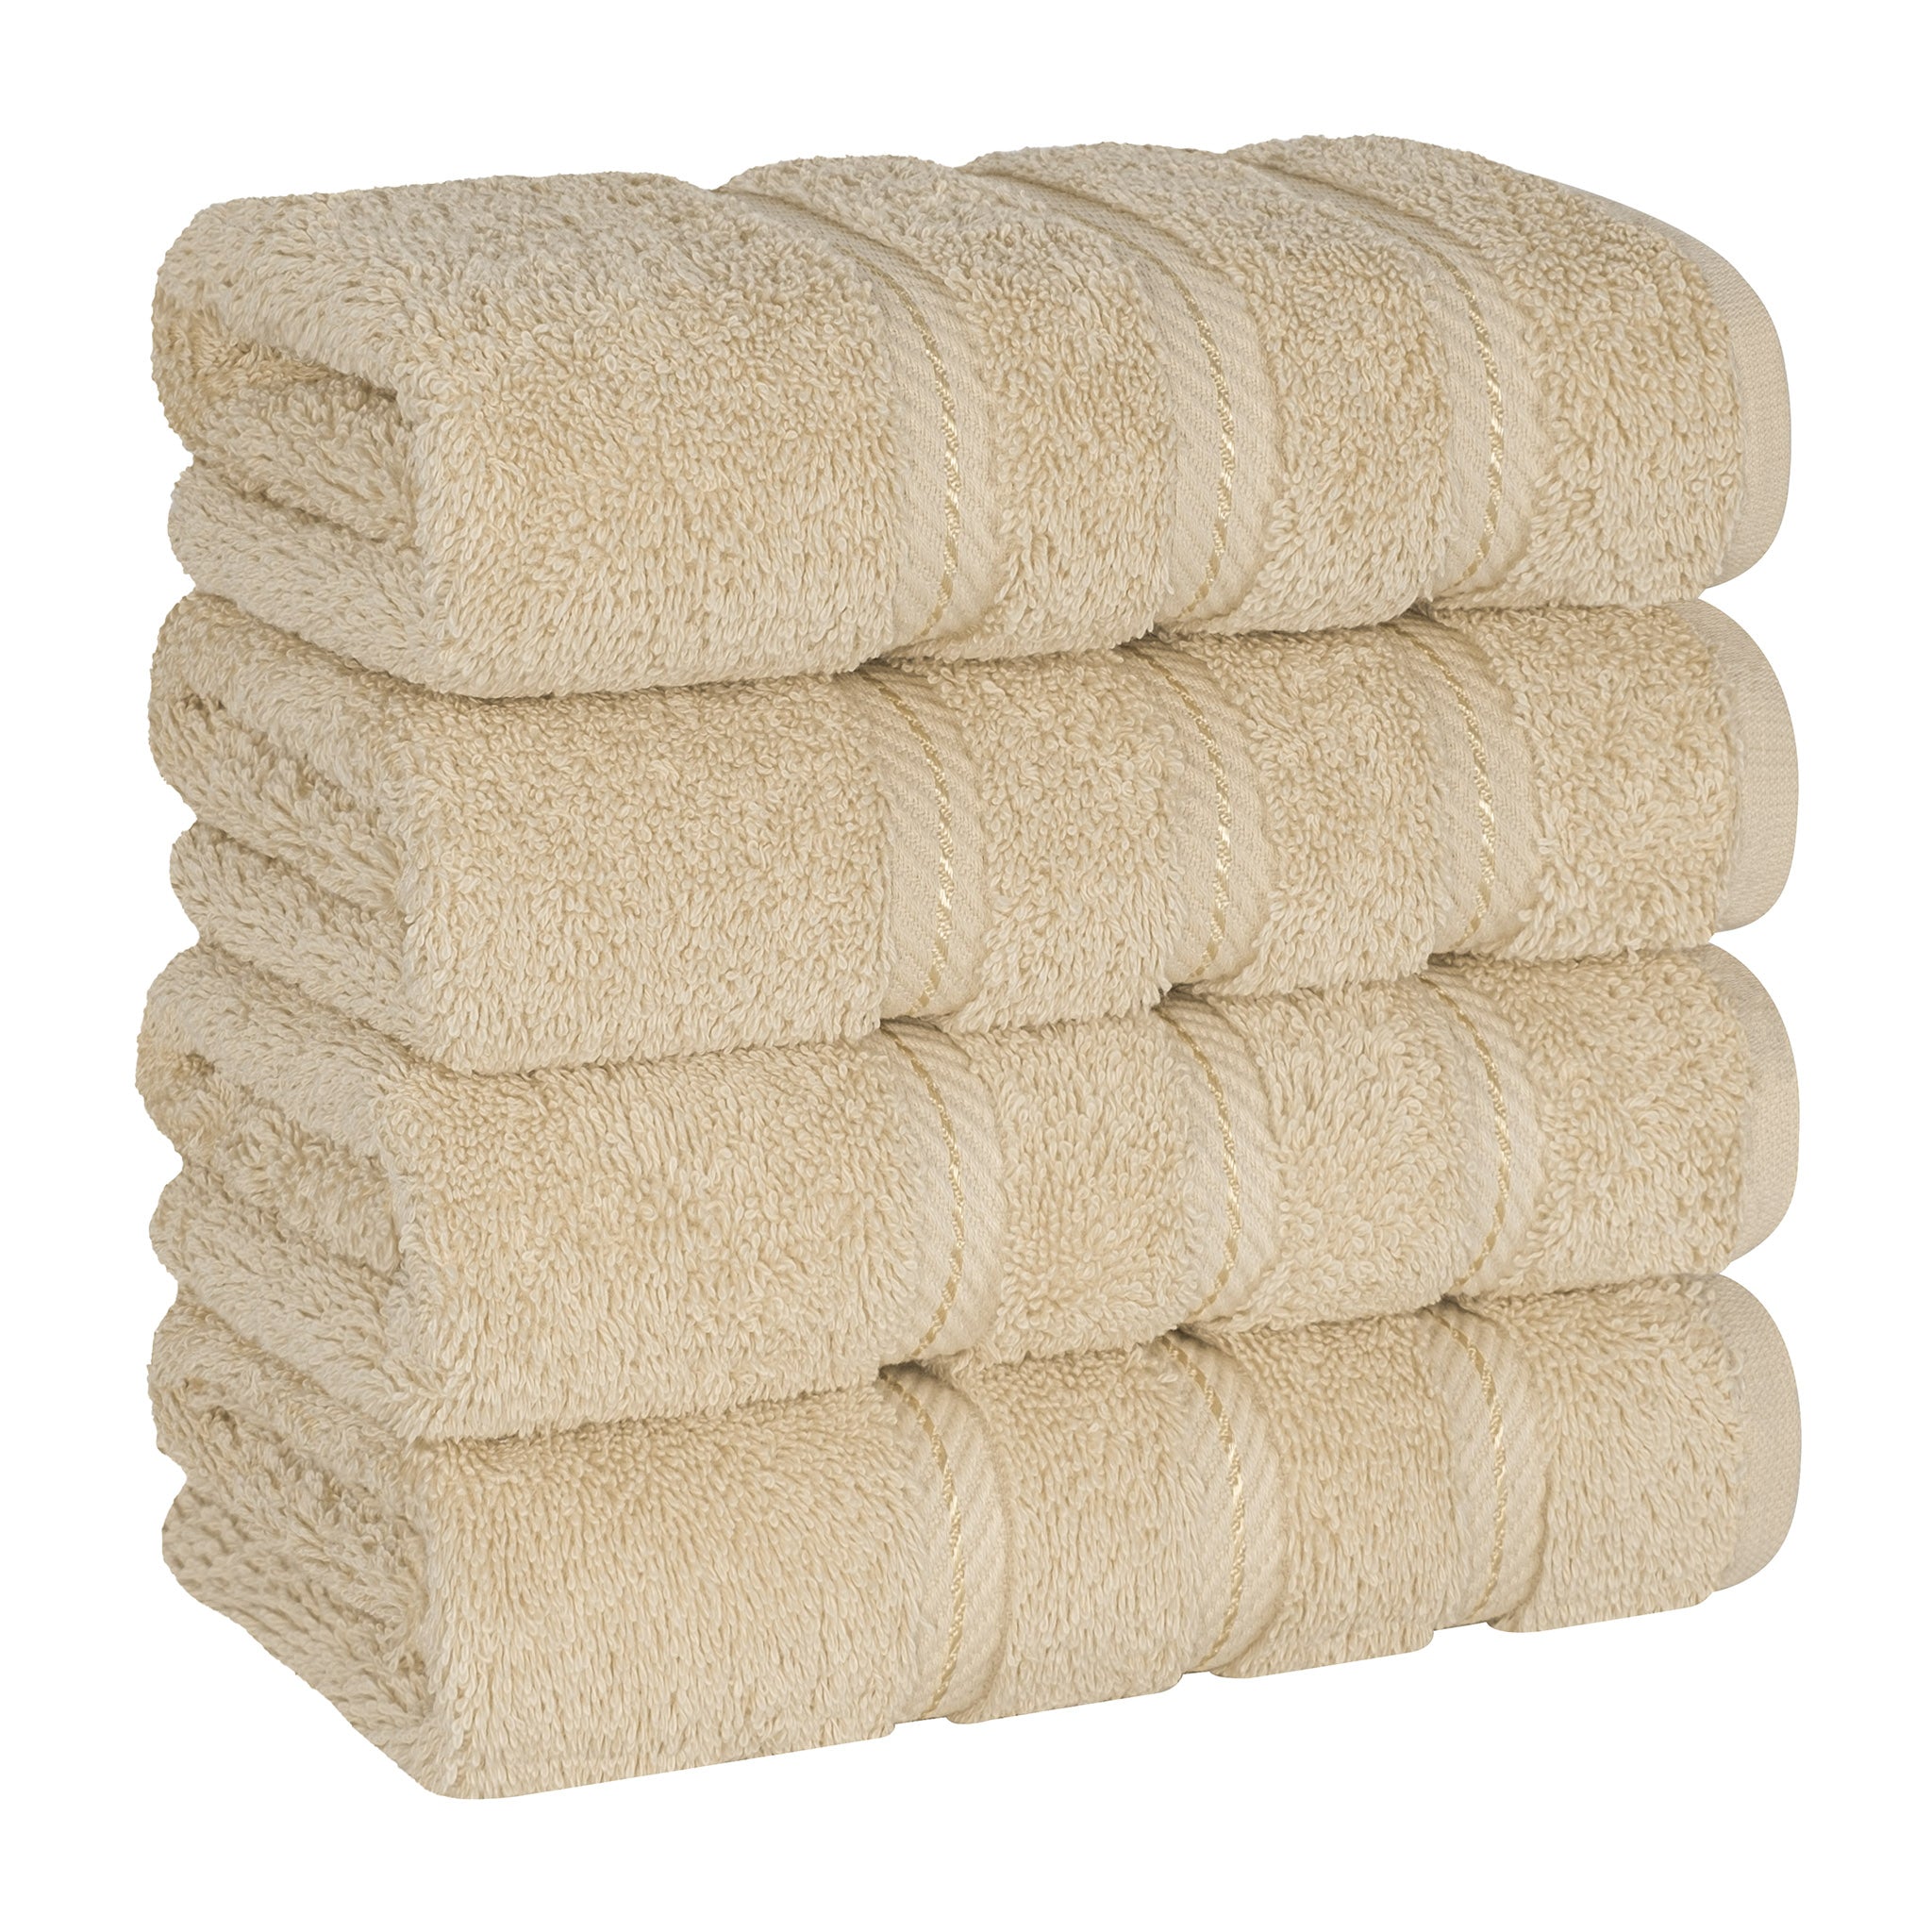 American Soft Linen 100% Turkish Cotton 4 Pack Hand Towel Set Wholesale sand-taupe-1